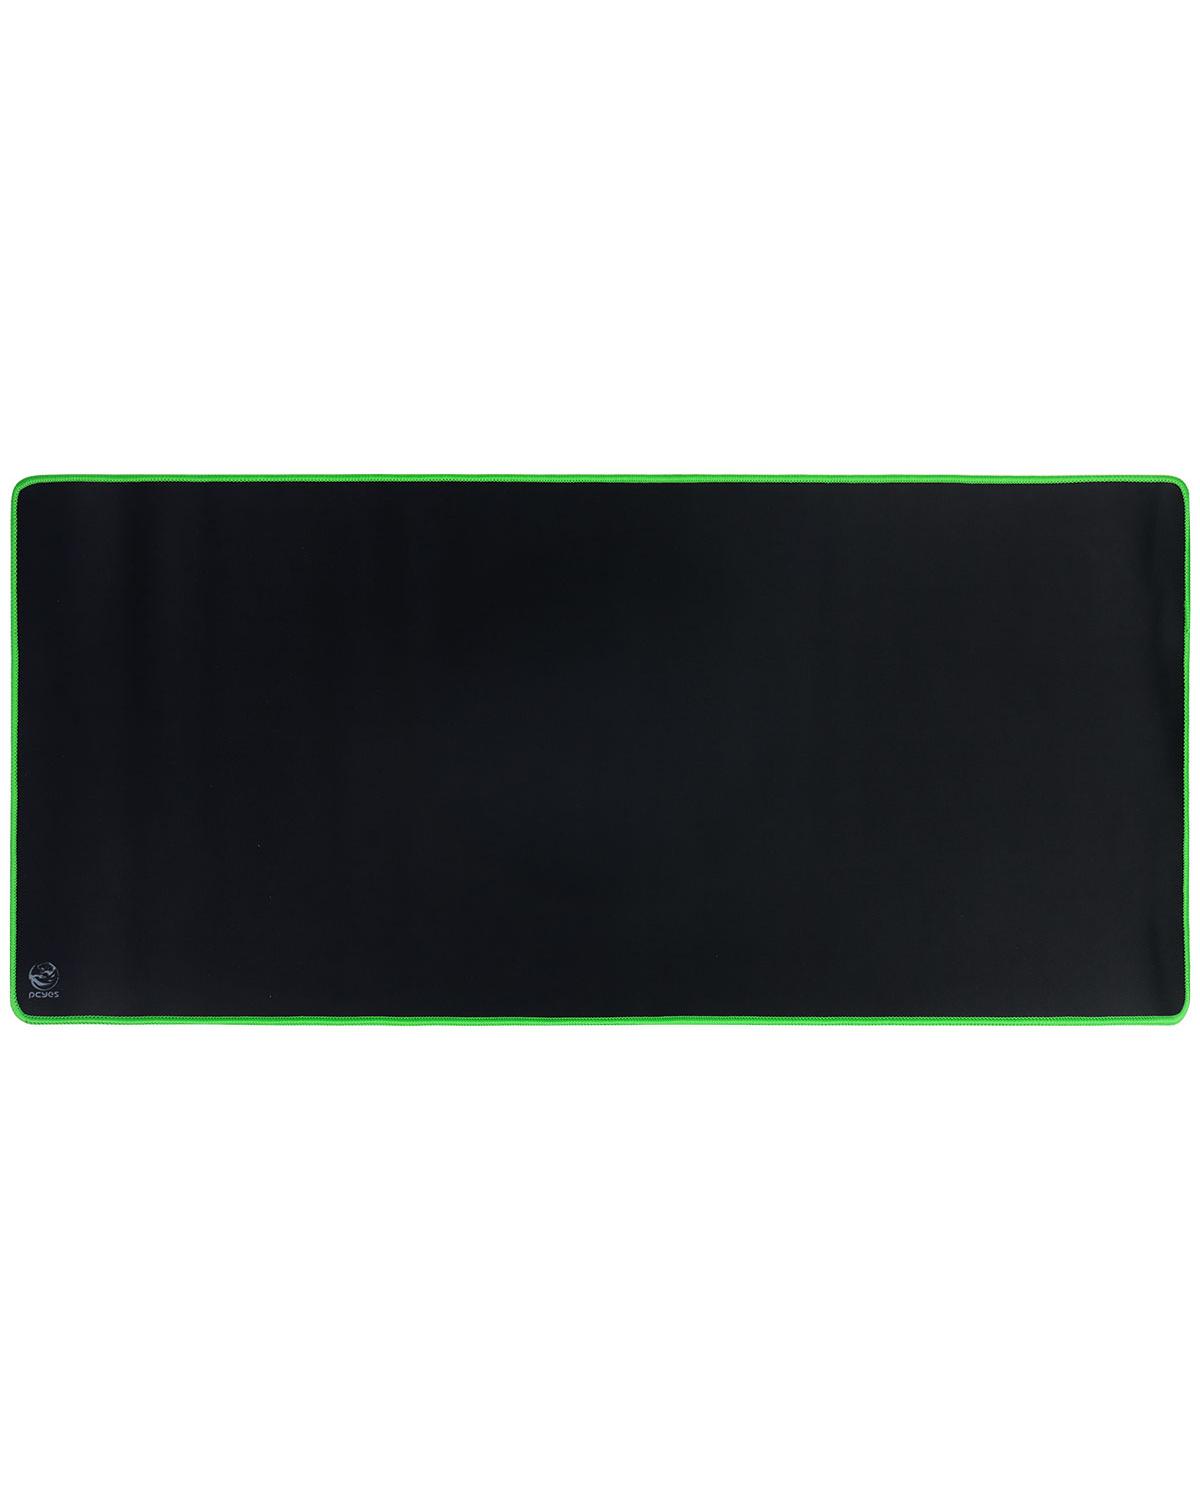 MOUSE PAD COLORS GREEN EXTENDED - ESTILO SPEED VERDE - 900X420MM - PMC90X42G